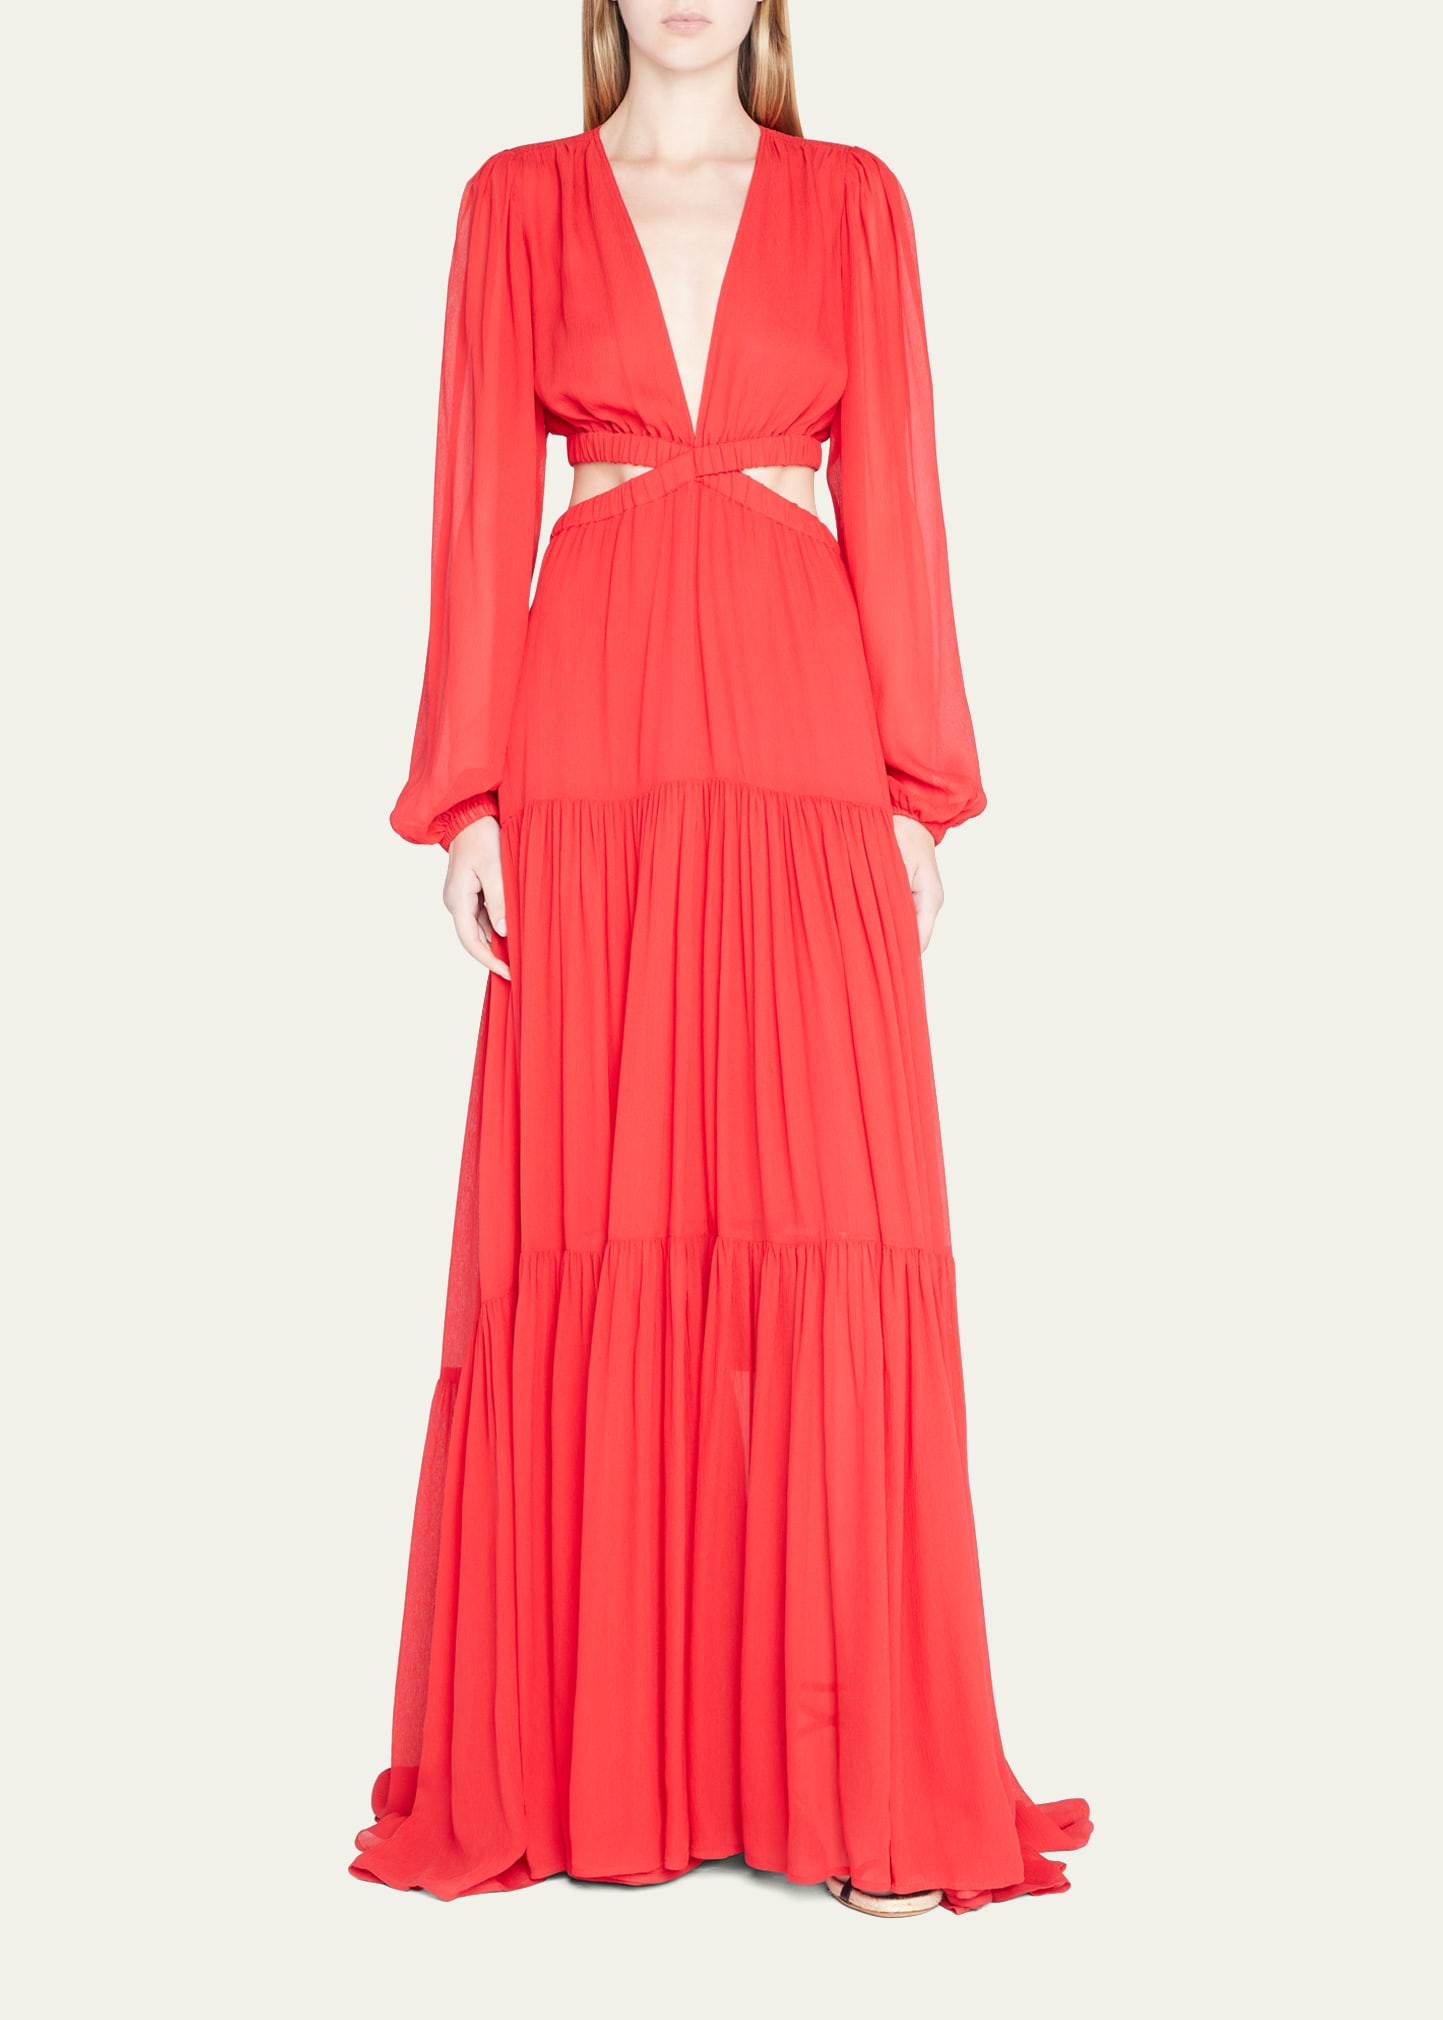 A.L.C. Isabelle Tiered Cut-Out Maxi Dress